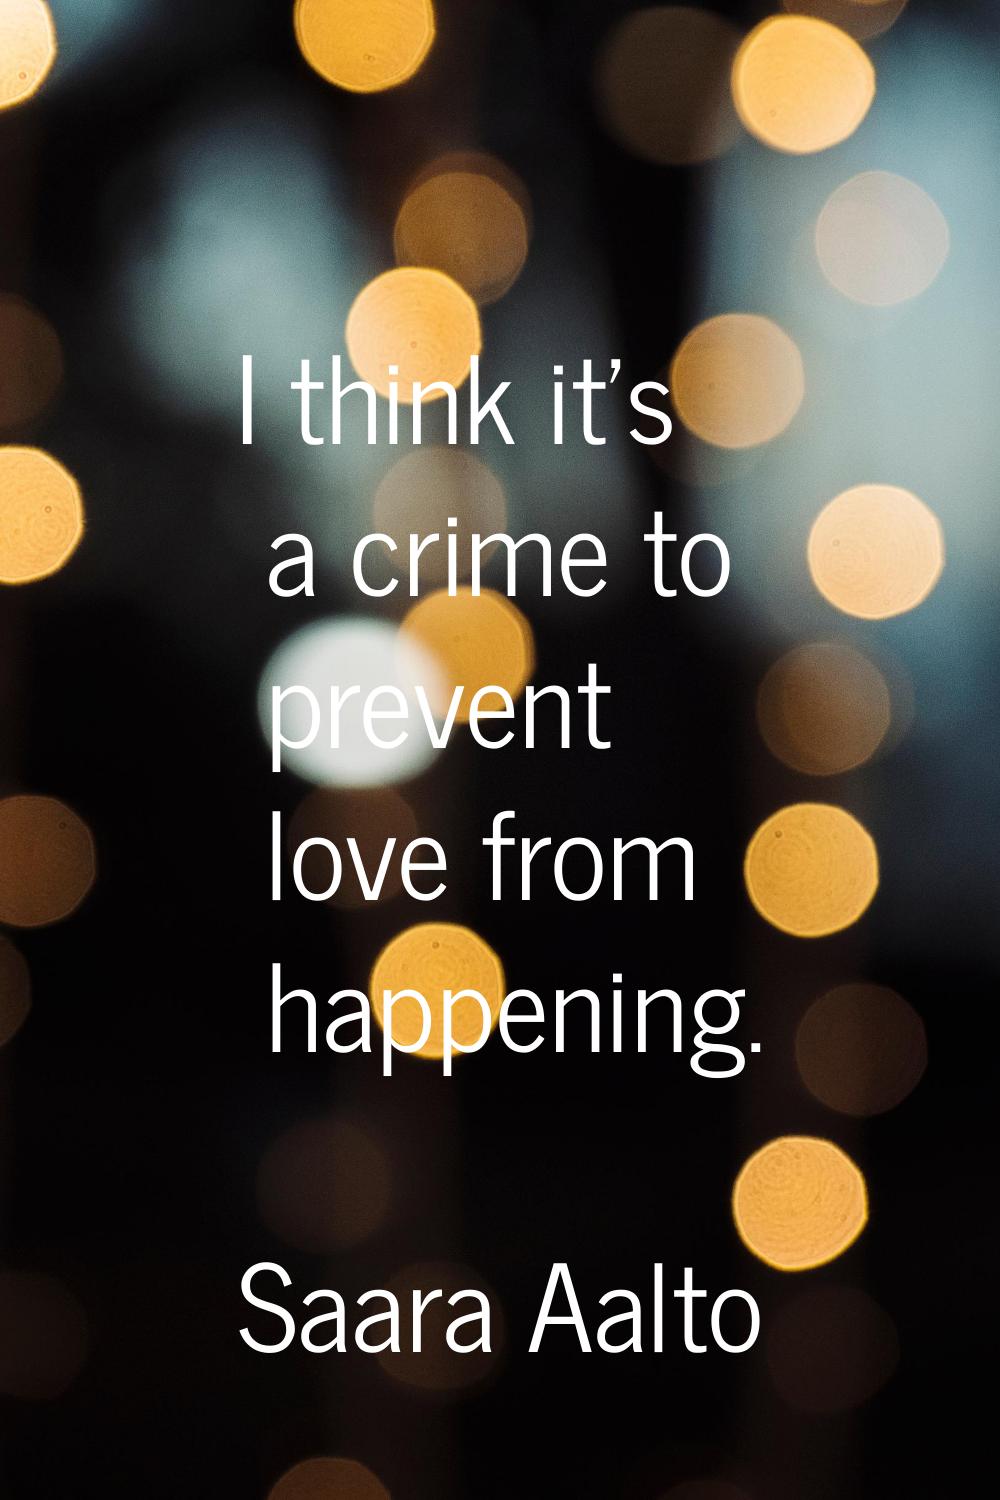 I think it's a crime to prevent love from happening.